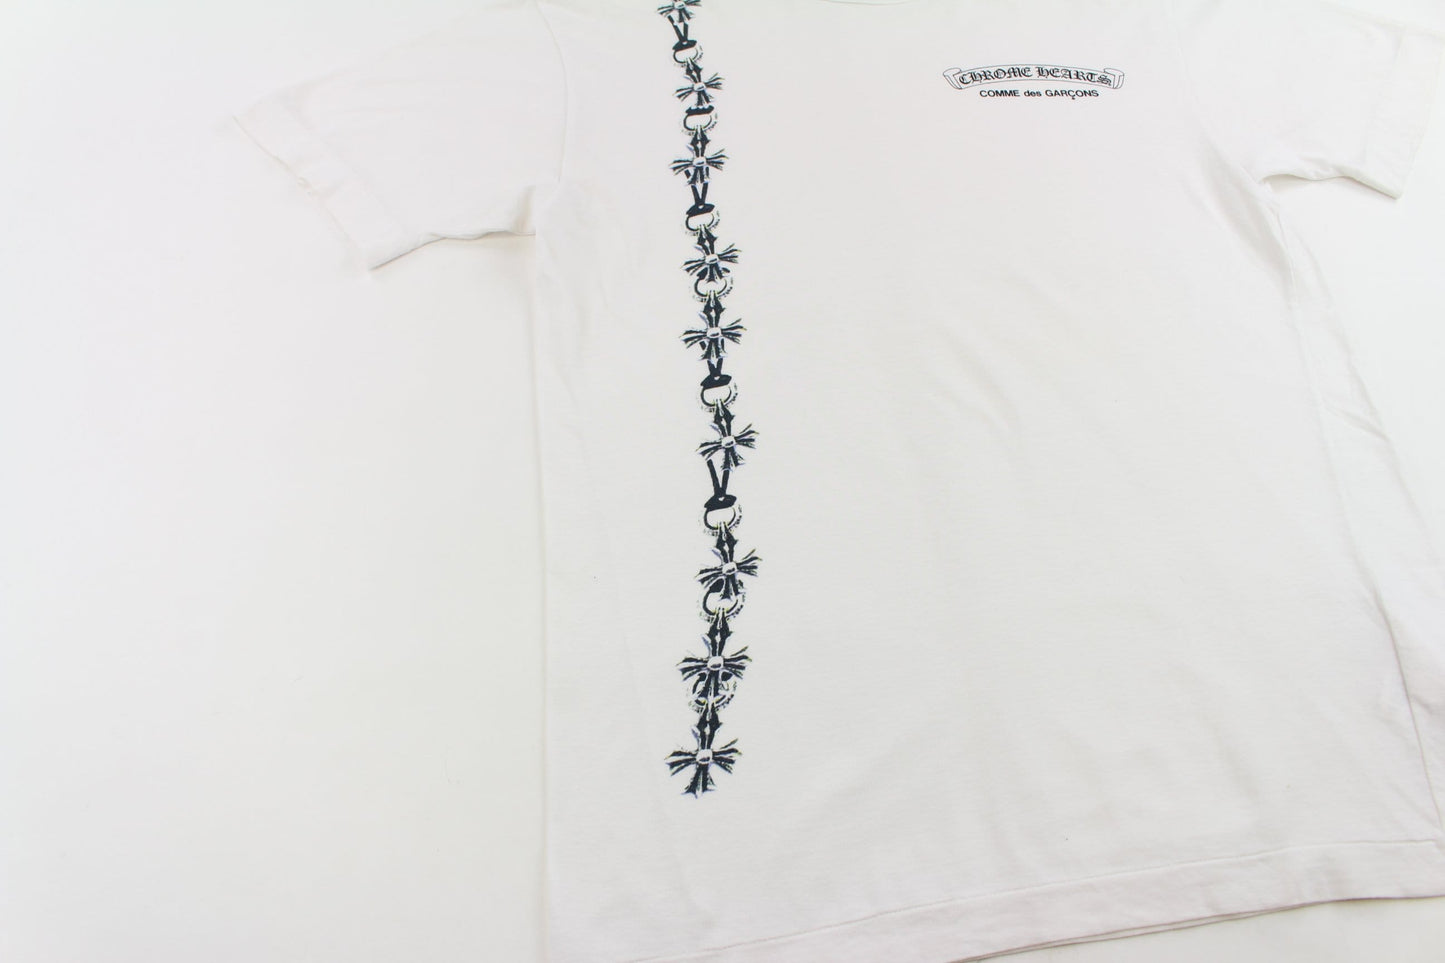 Chrome Hearts x Comme des garcon barbed wire tee 2009 - SARUUK